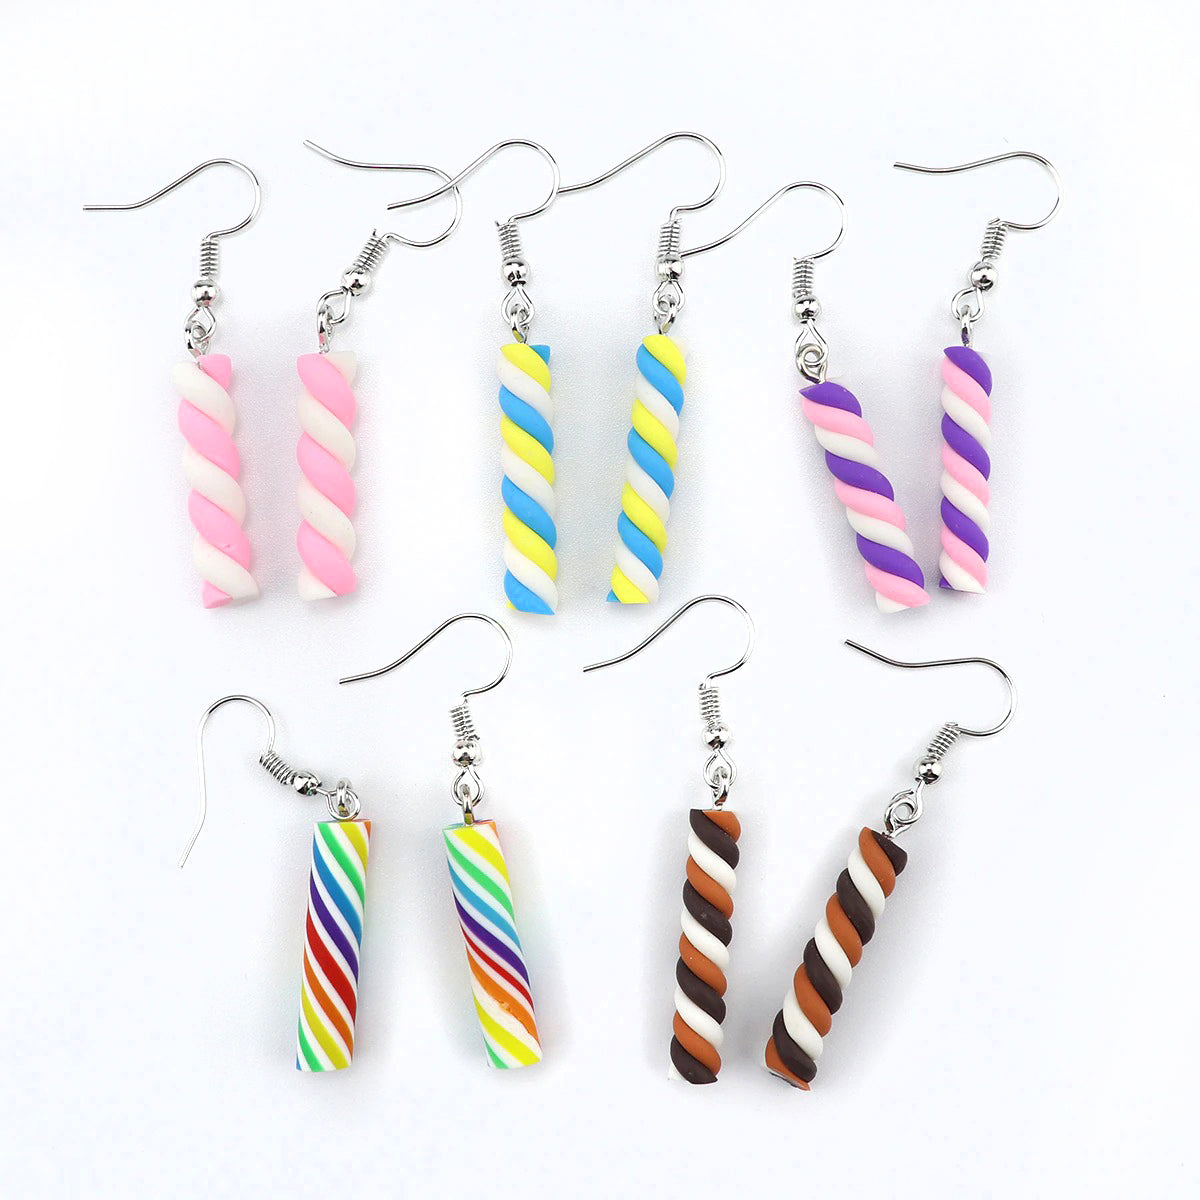 Teenytopia Barber Pole Candy Earrings - Cute polymer clay earrings shaped like twisted candy sticks, in an assortment of vibrant colour combinations.